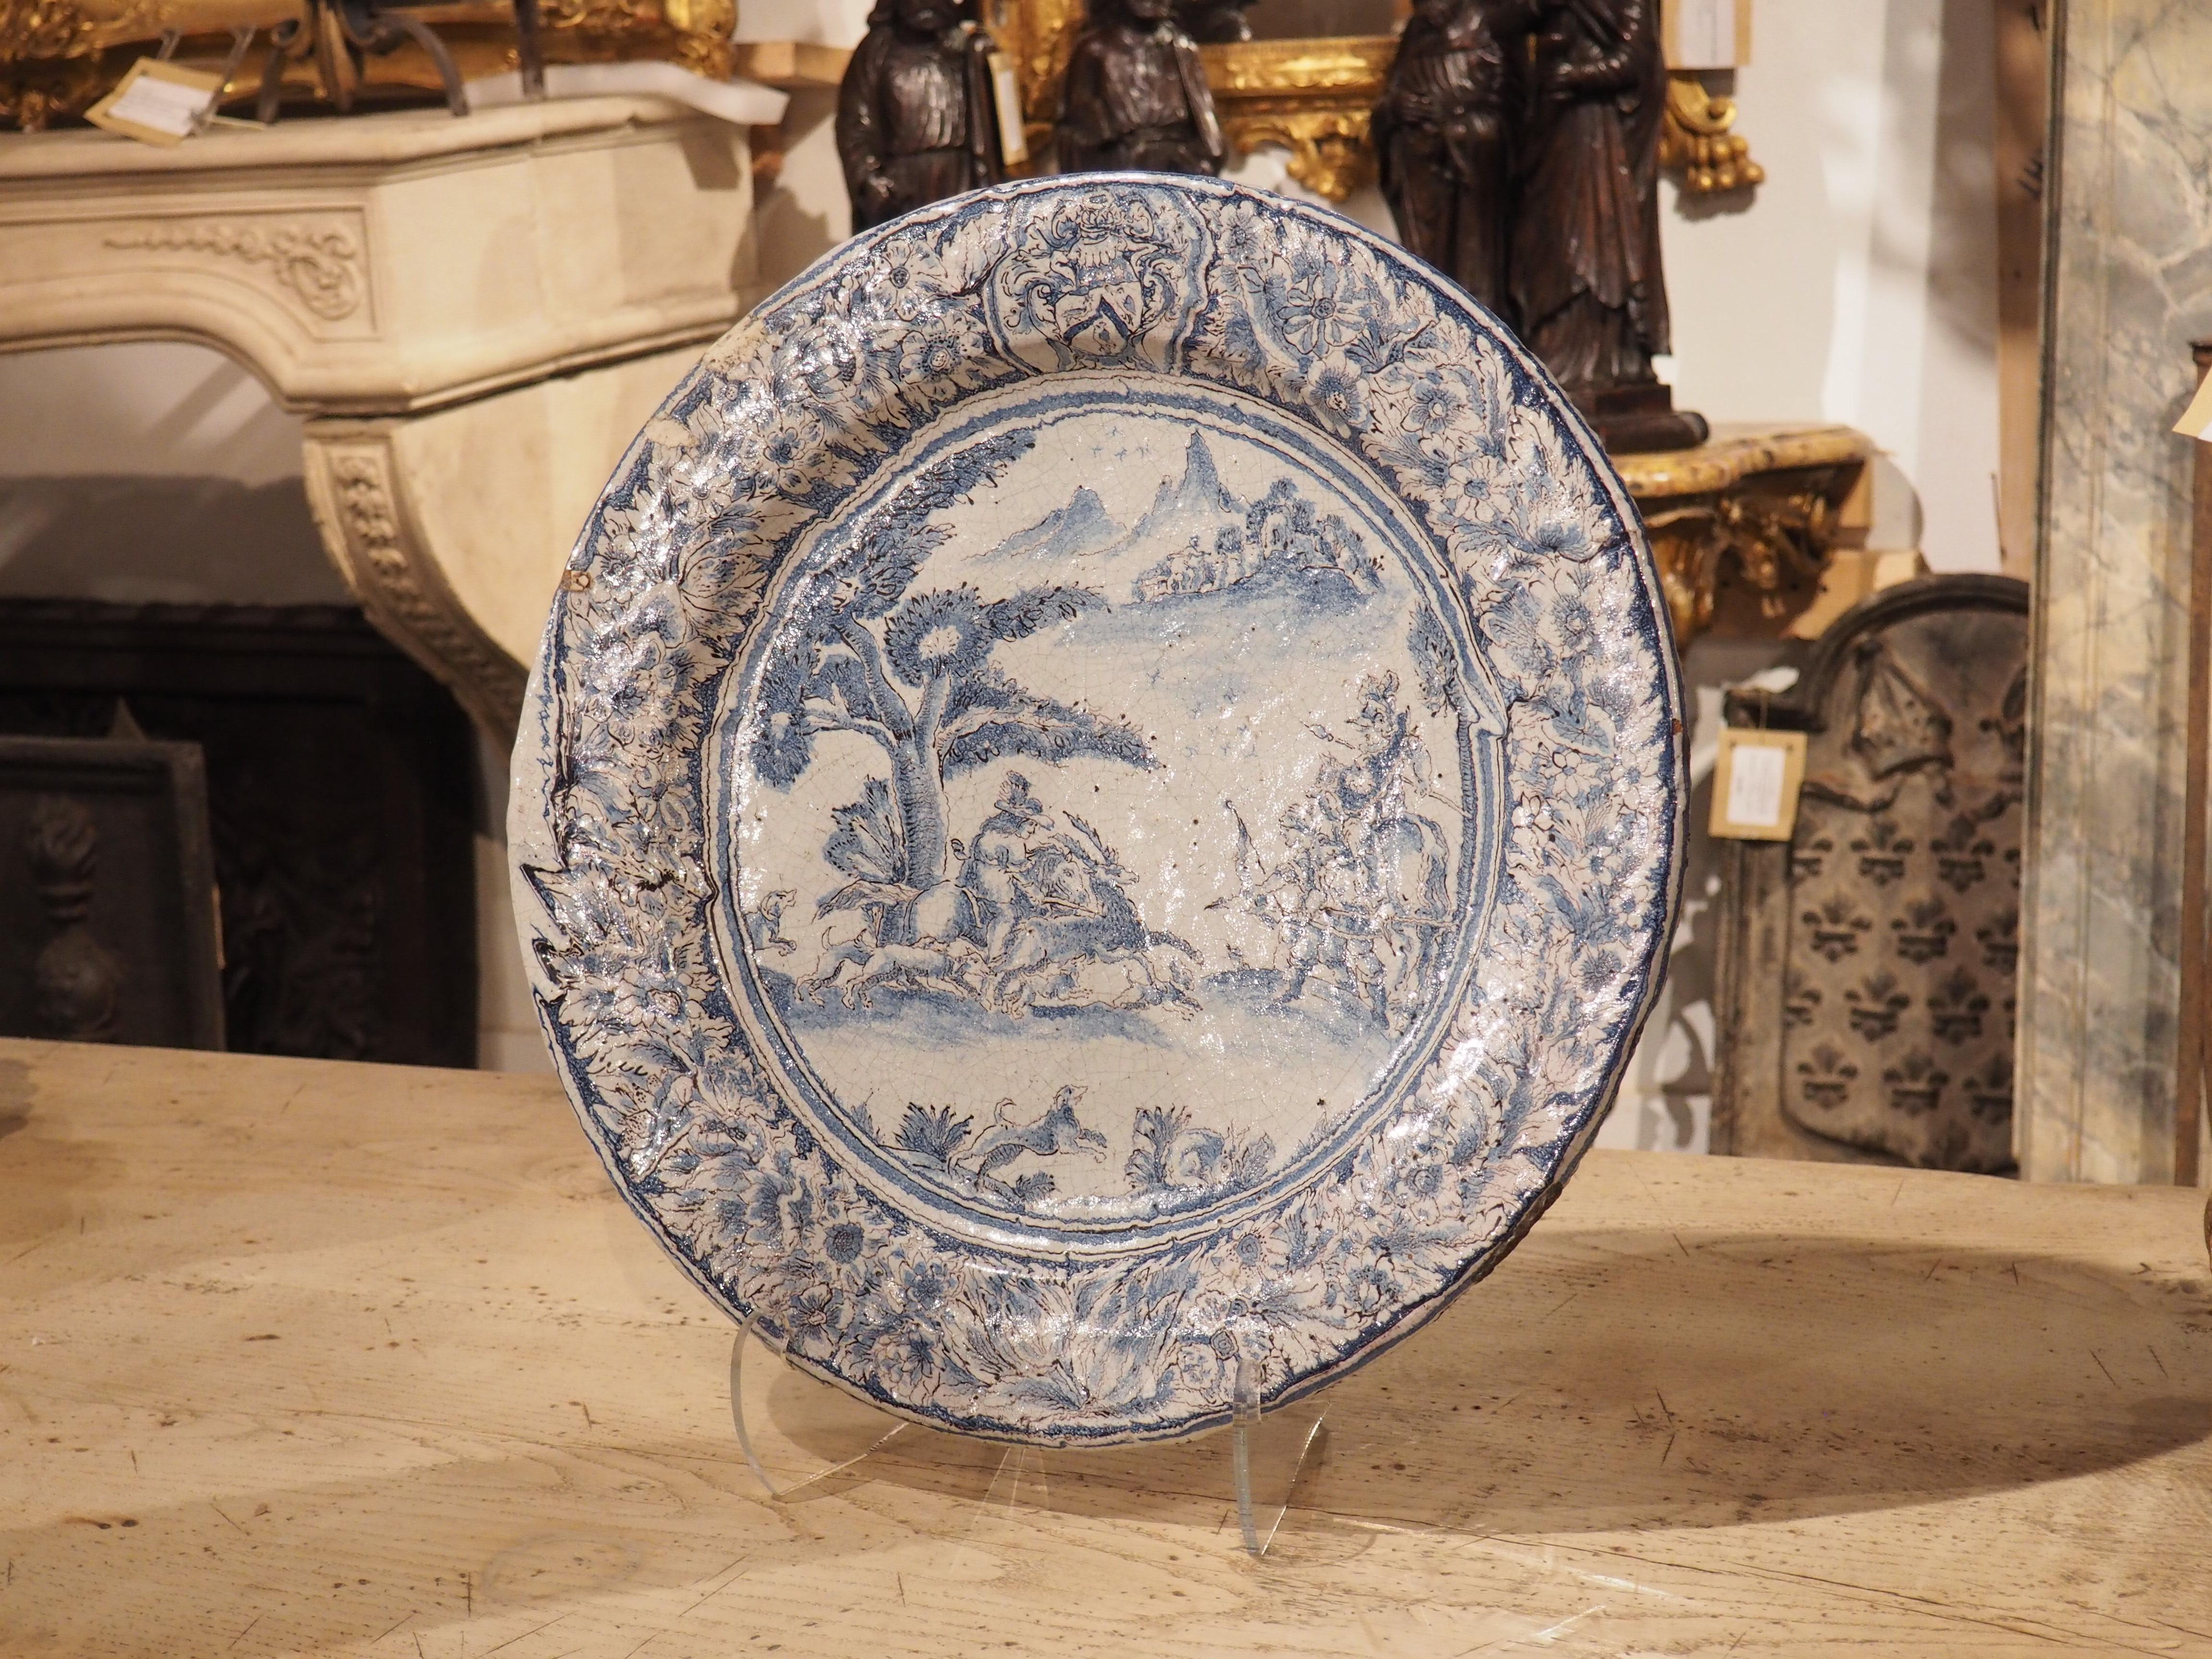 Hand painted in the 1600s in France (most likely in or around Paris), this large blue and white faience platter features a scene depicting a stag hunt surrounded by a luxurious floral wreath on the raised lip. At the top of the platter, set amongst